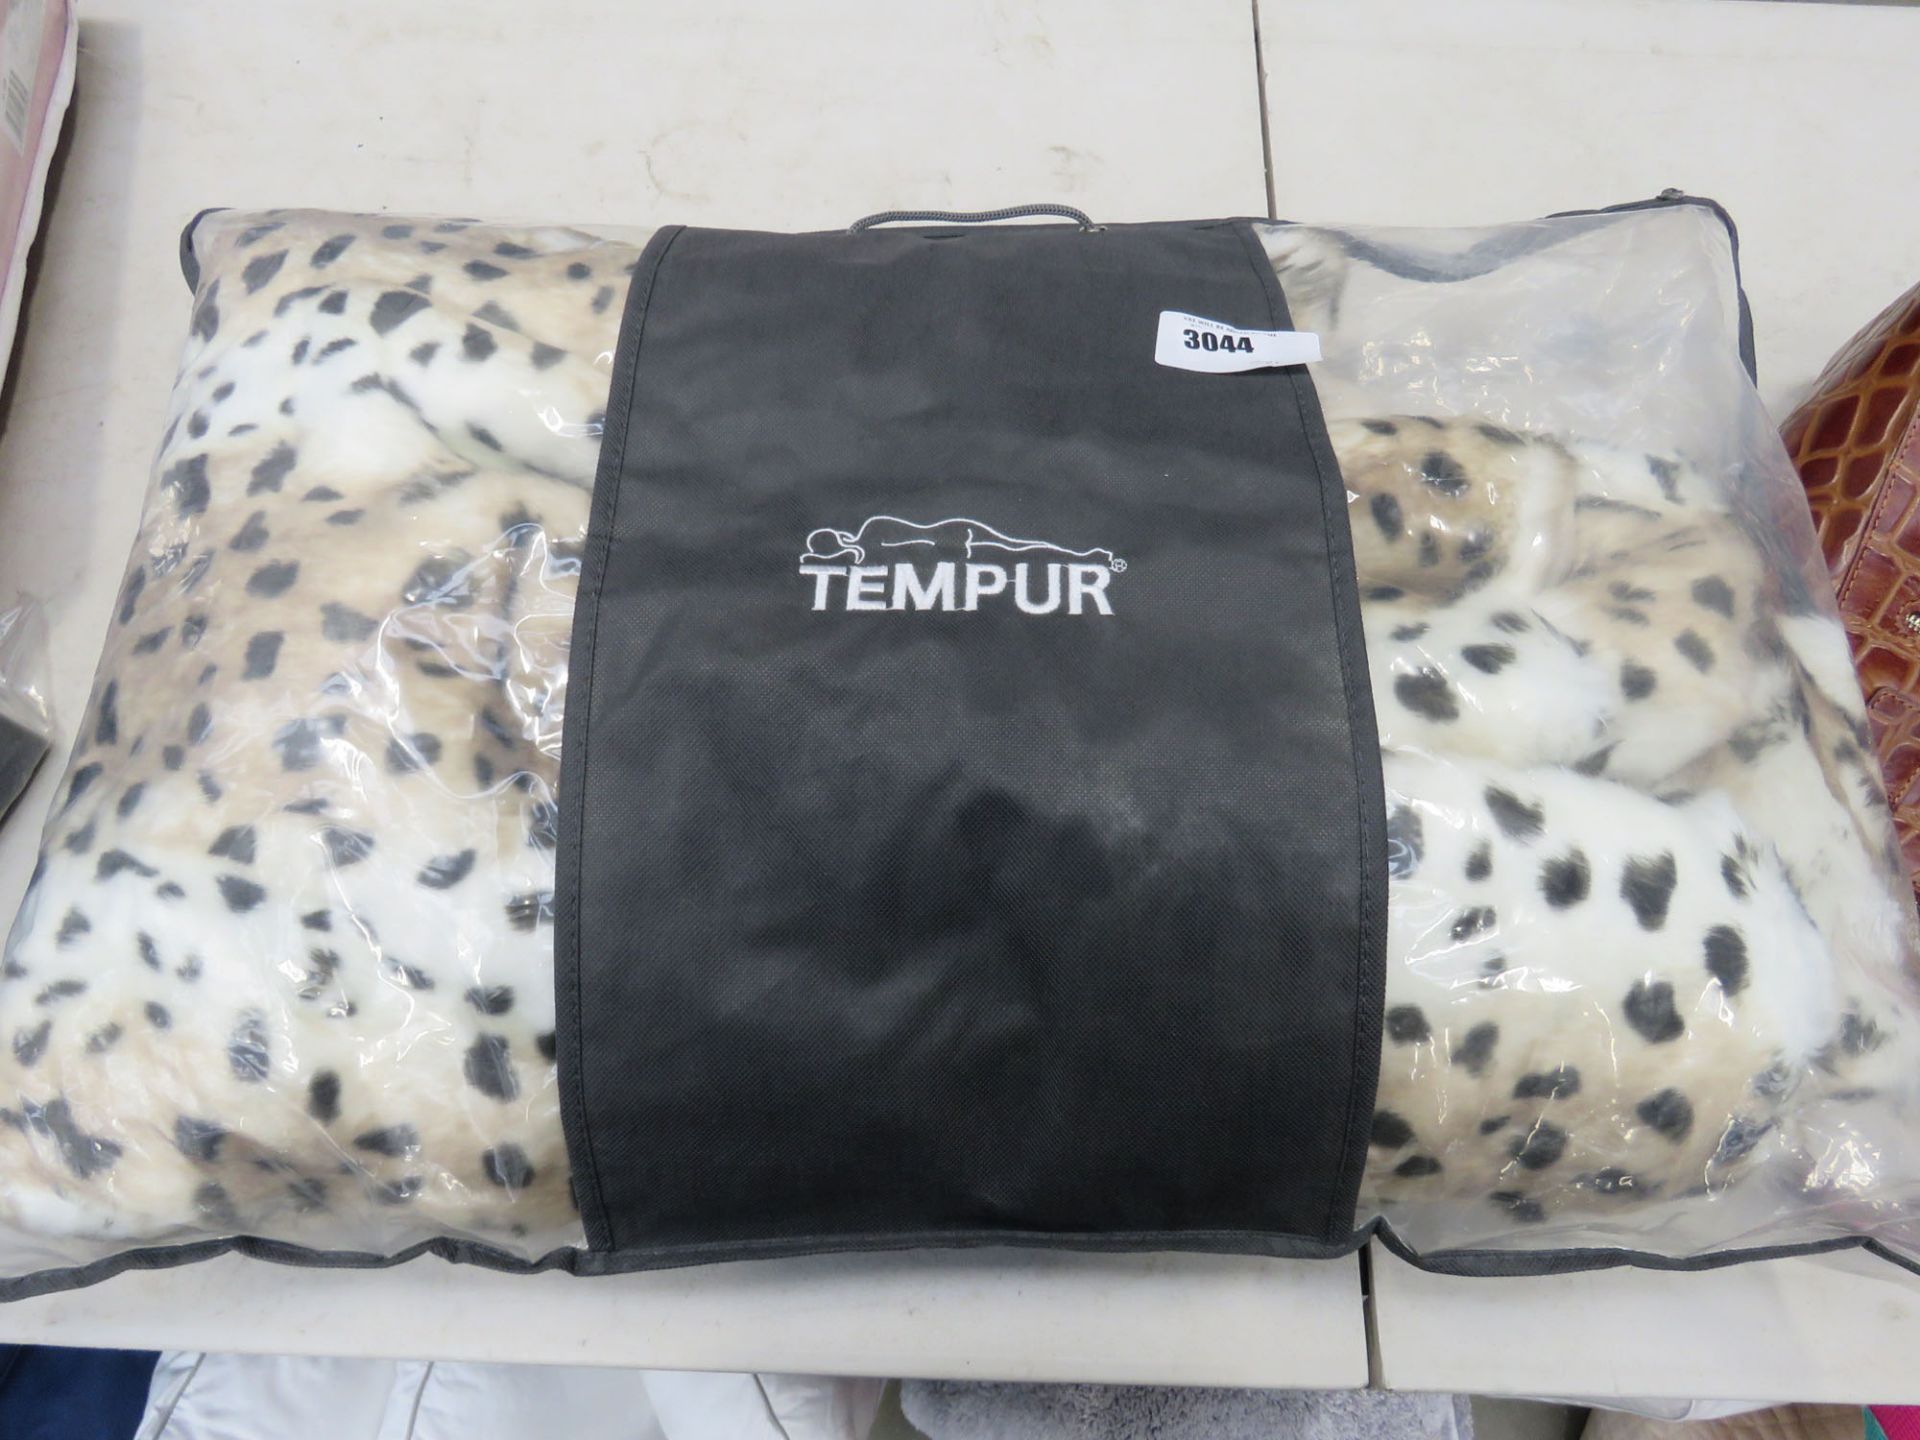 Bag containing heated blanket in a Tempur zipped bag